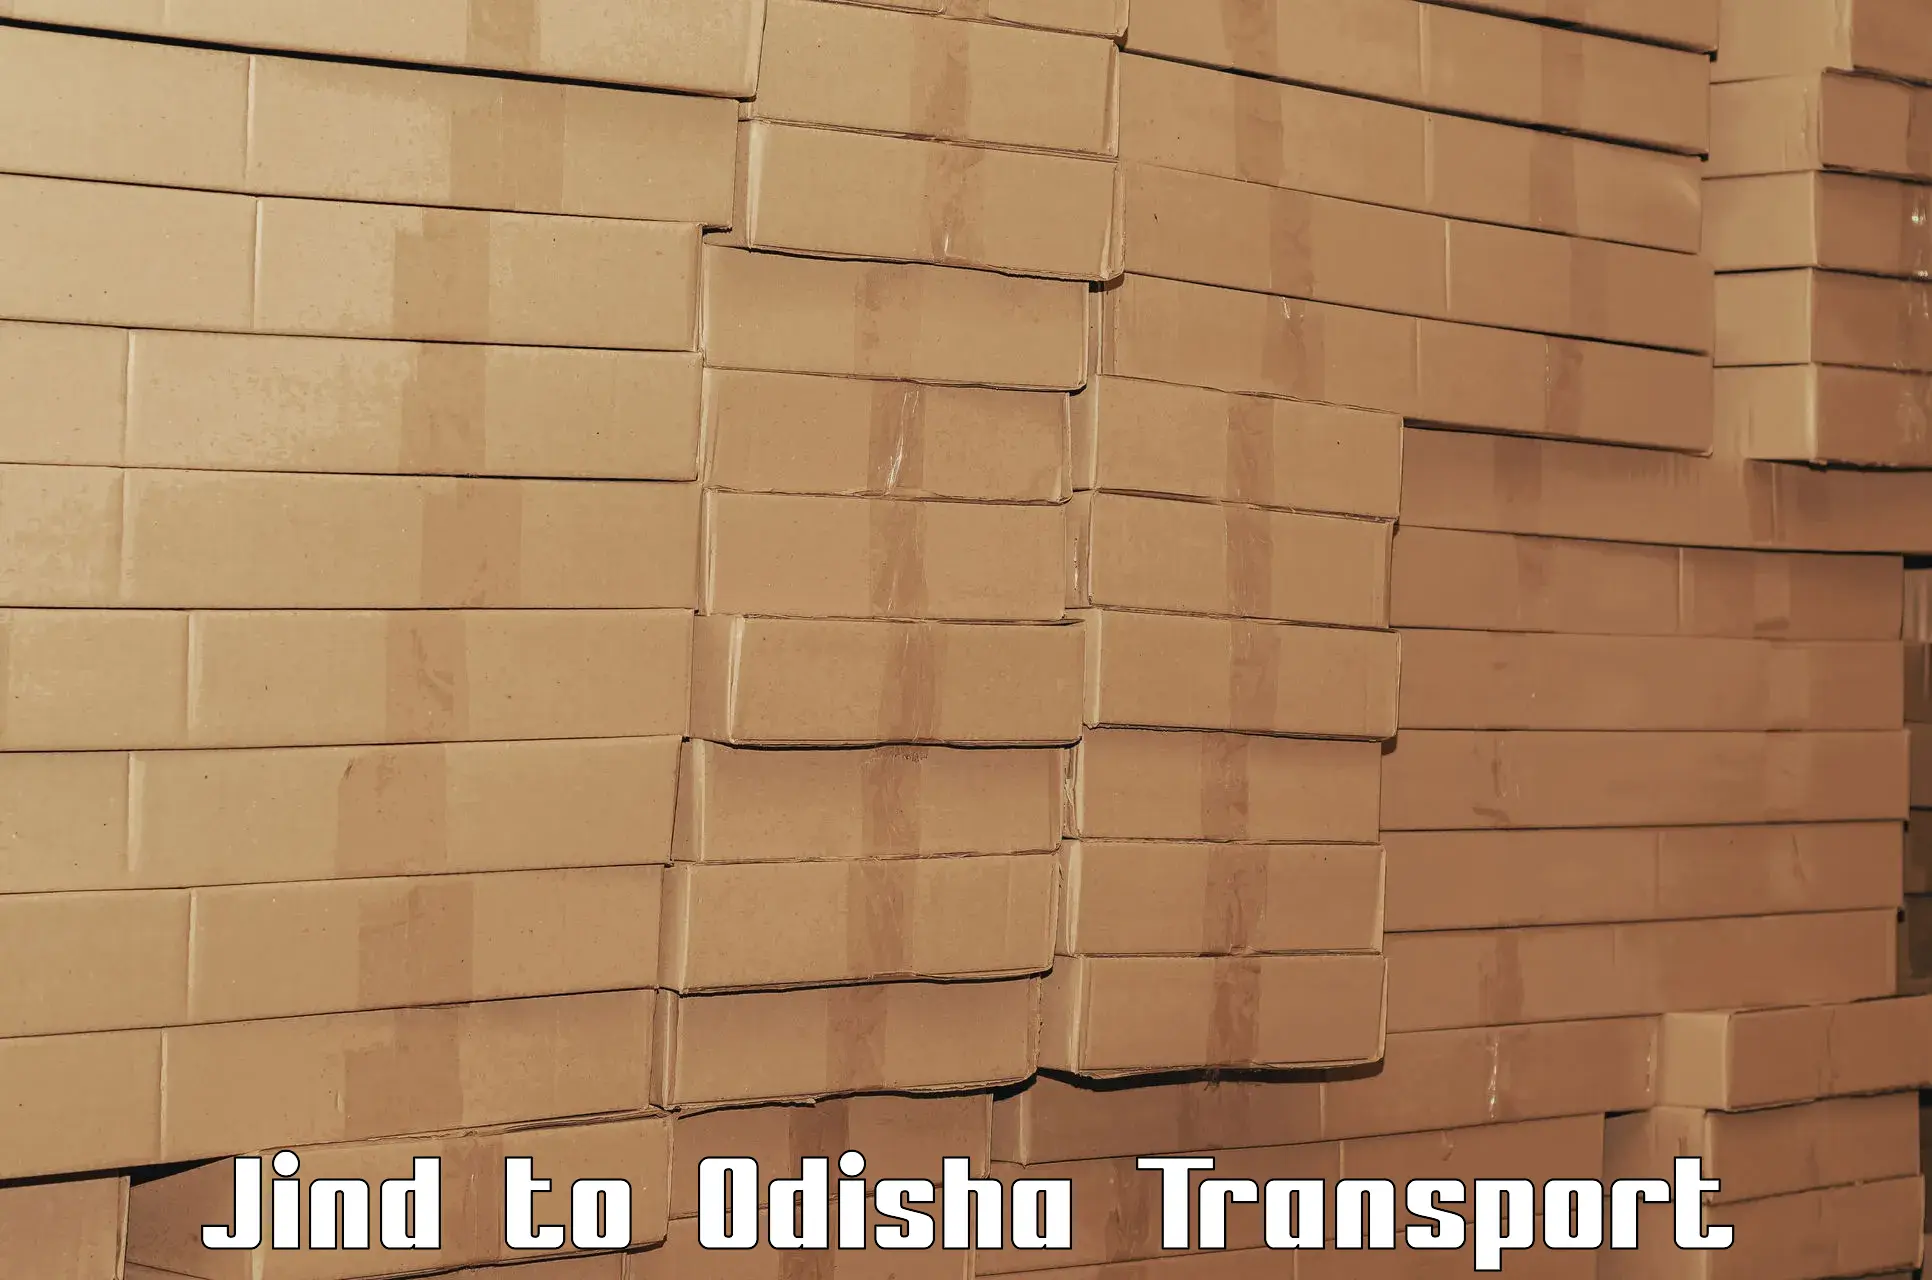 Container transport service Jind to Odisha